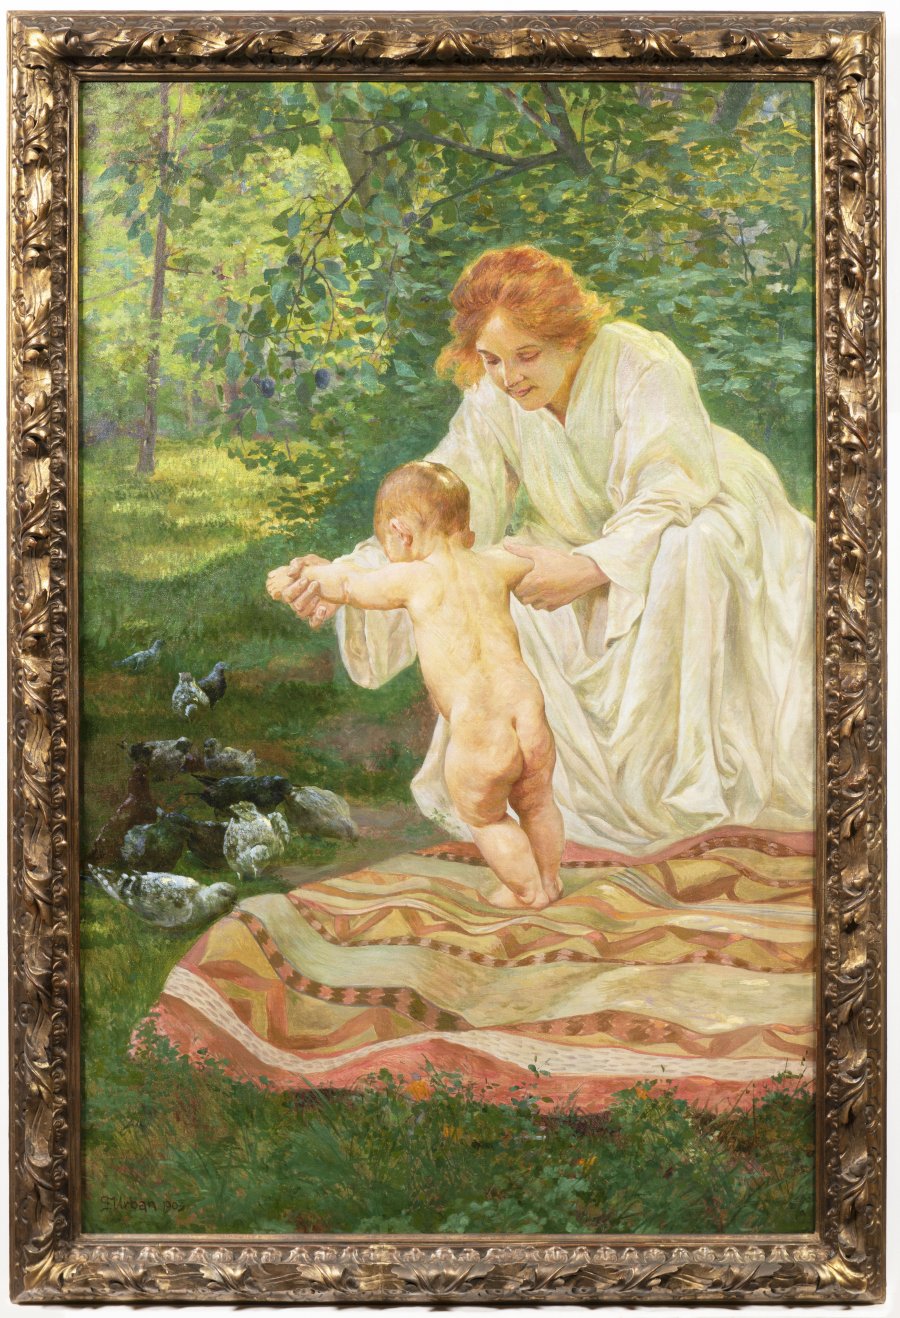 WOMAN WITH A CHILD